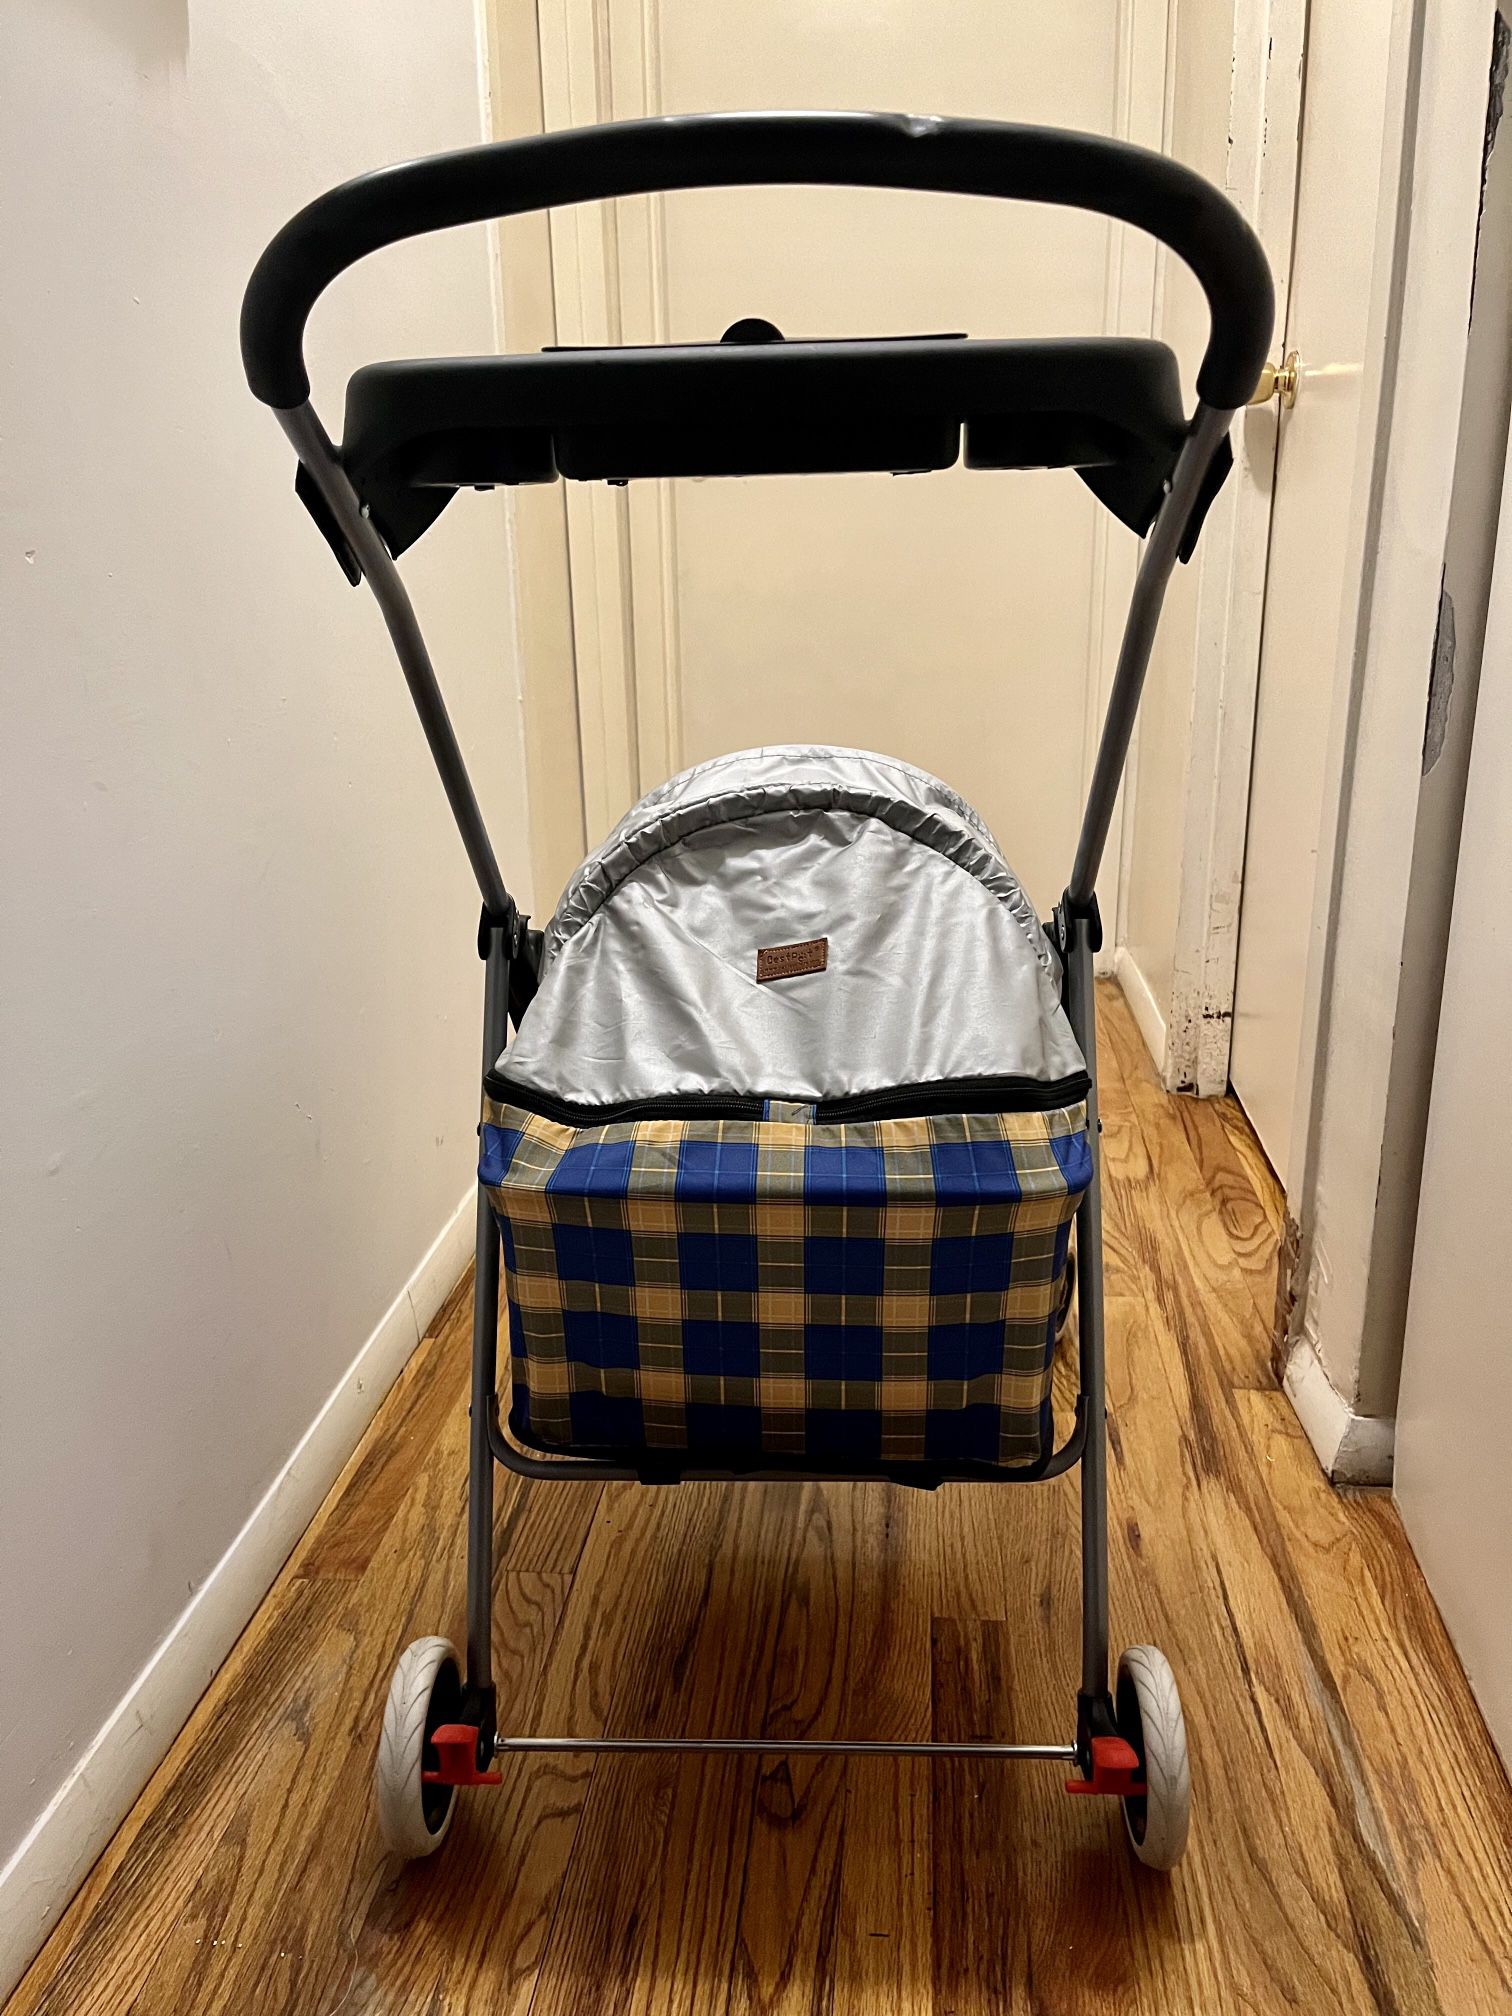 Indoors & Outdoors Pet Folding Stroller With 4 Rolling Wheels Posh / Yellow Plaid